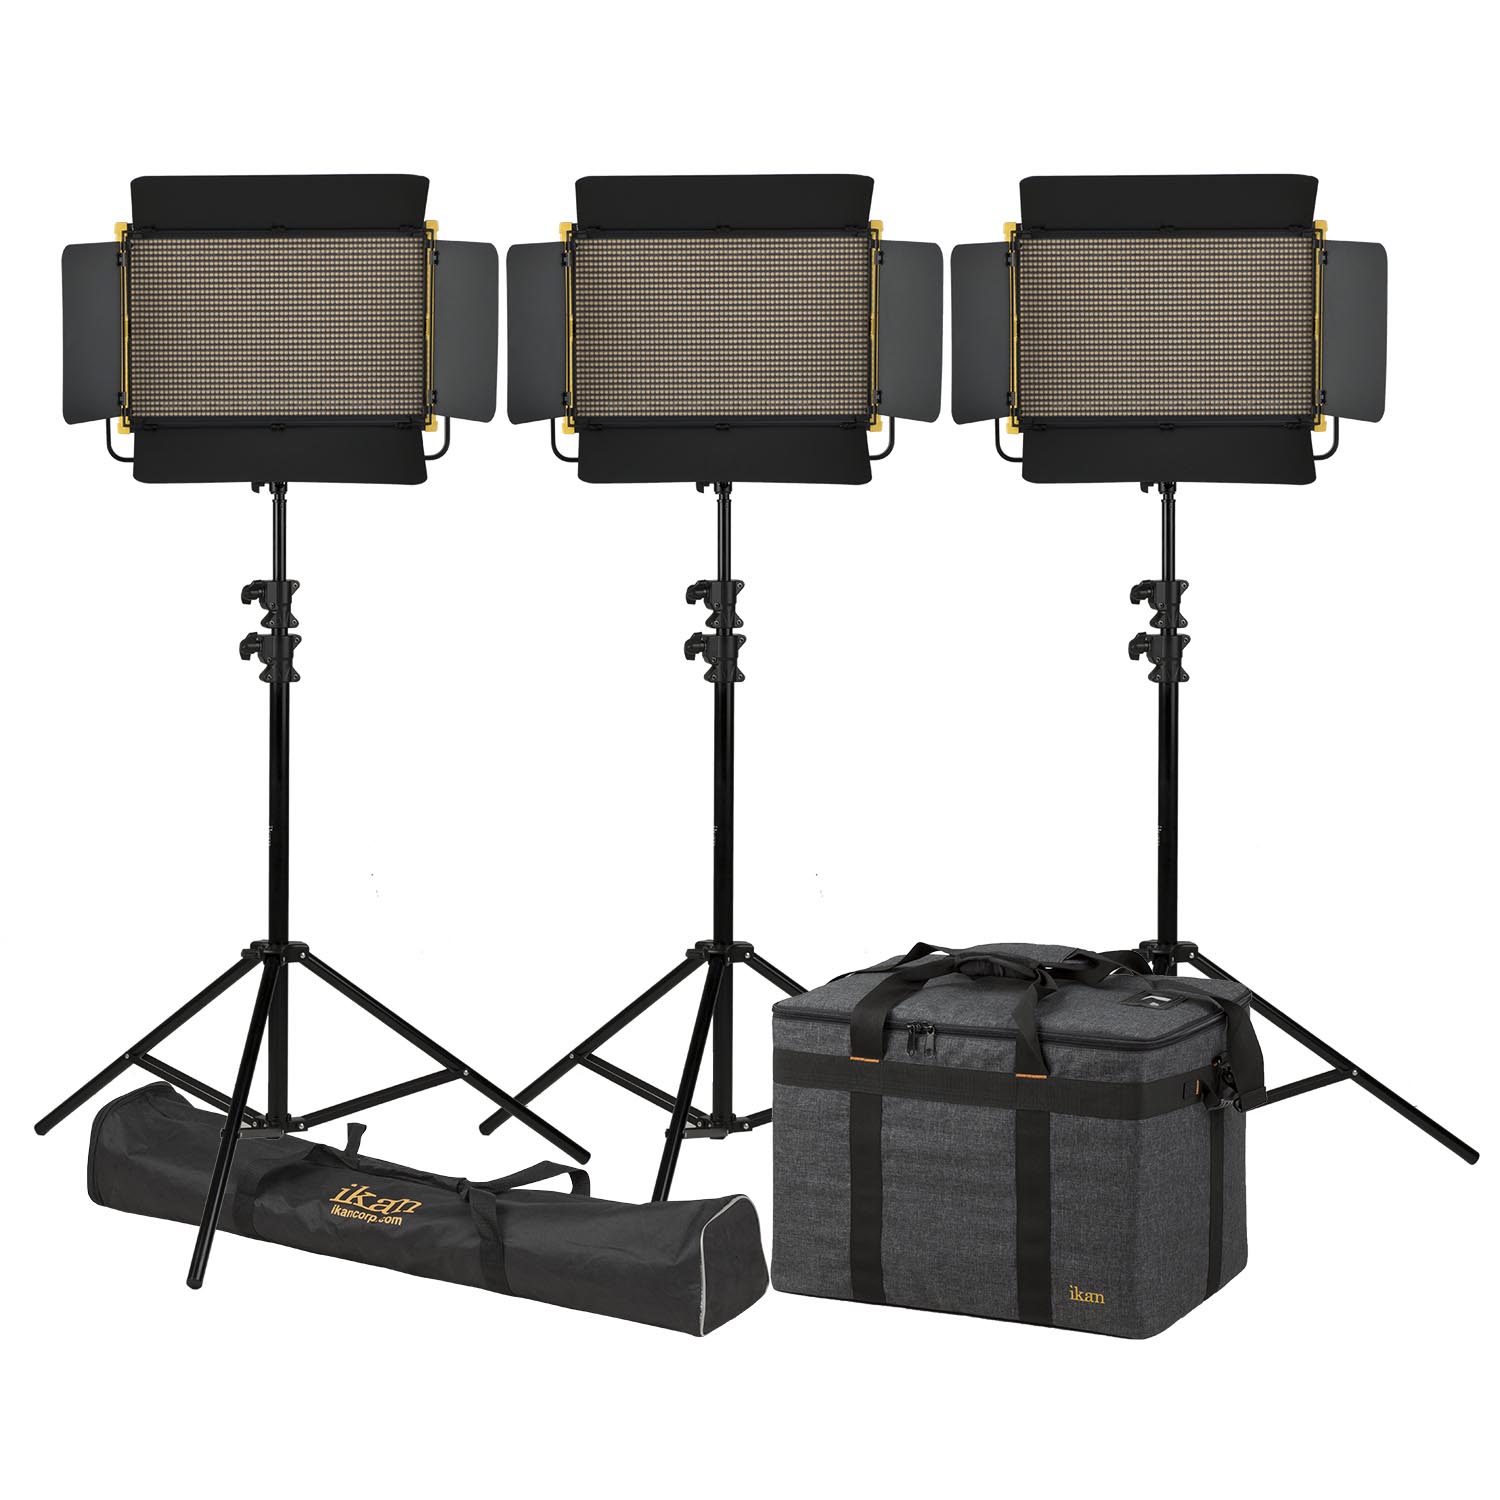 Næb glide afregning Onyx 1 x 2 Bi-Color 3-Point LED Light Kit with 3x OYB15 Includes Stands and  Bags - Ikan